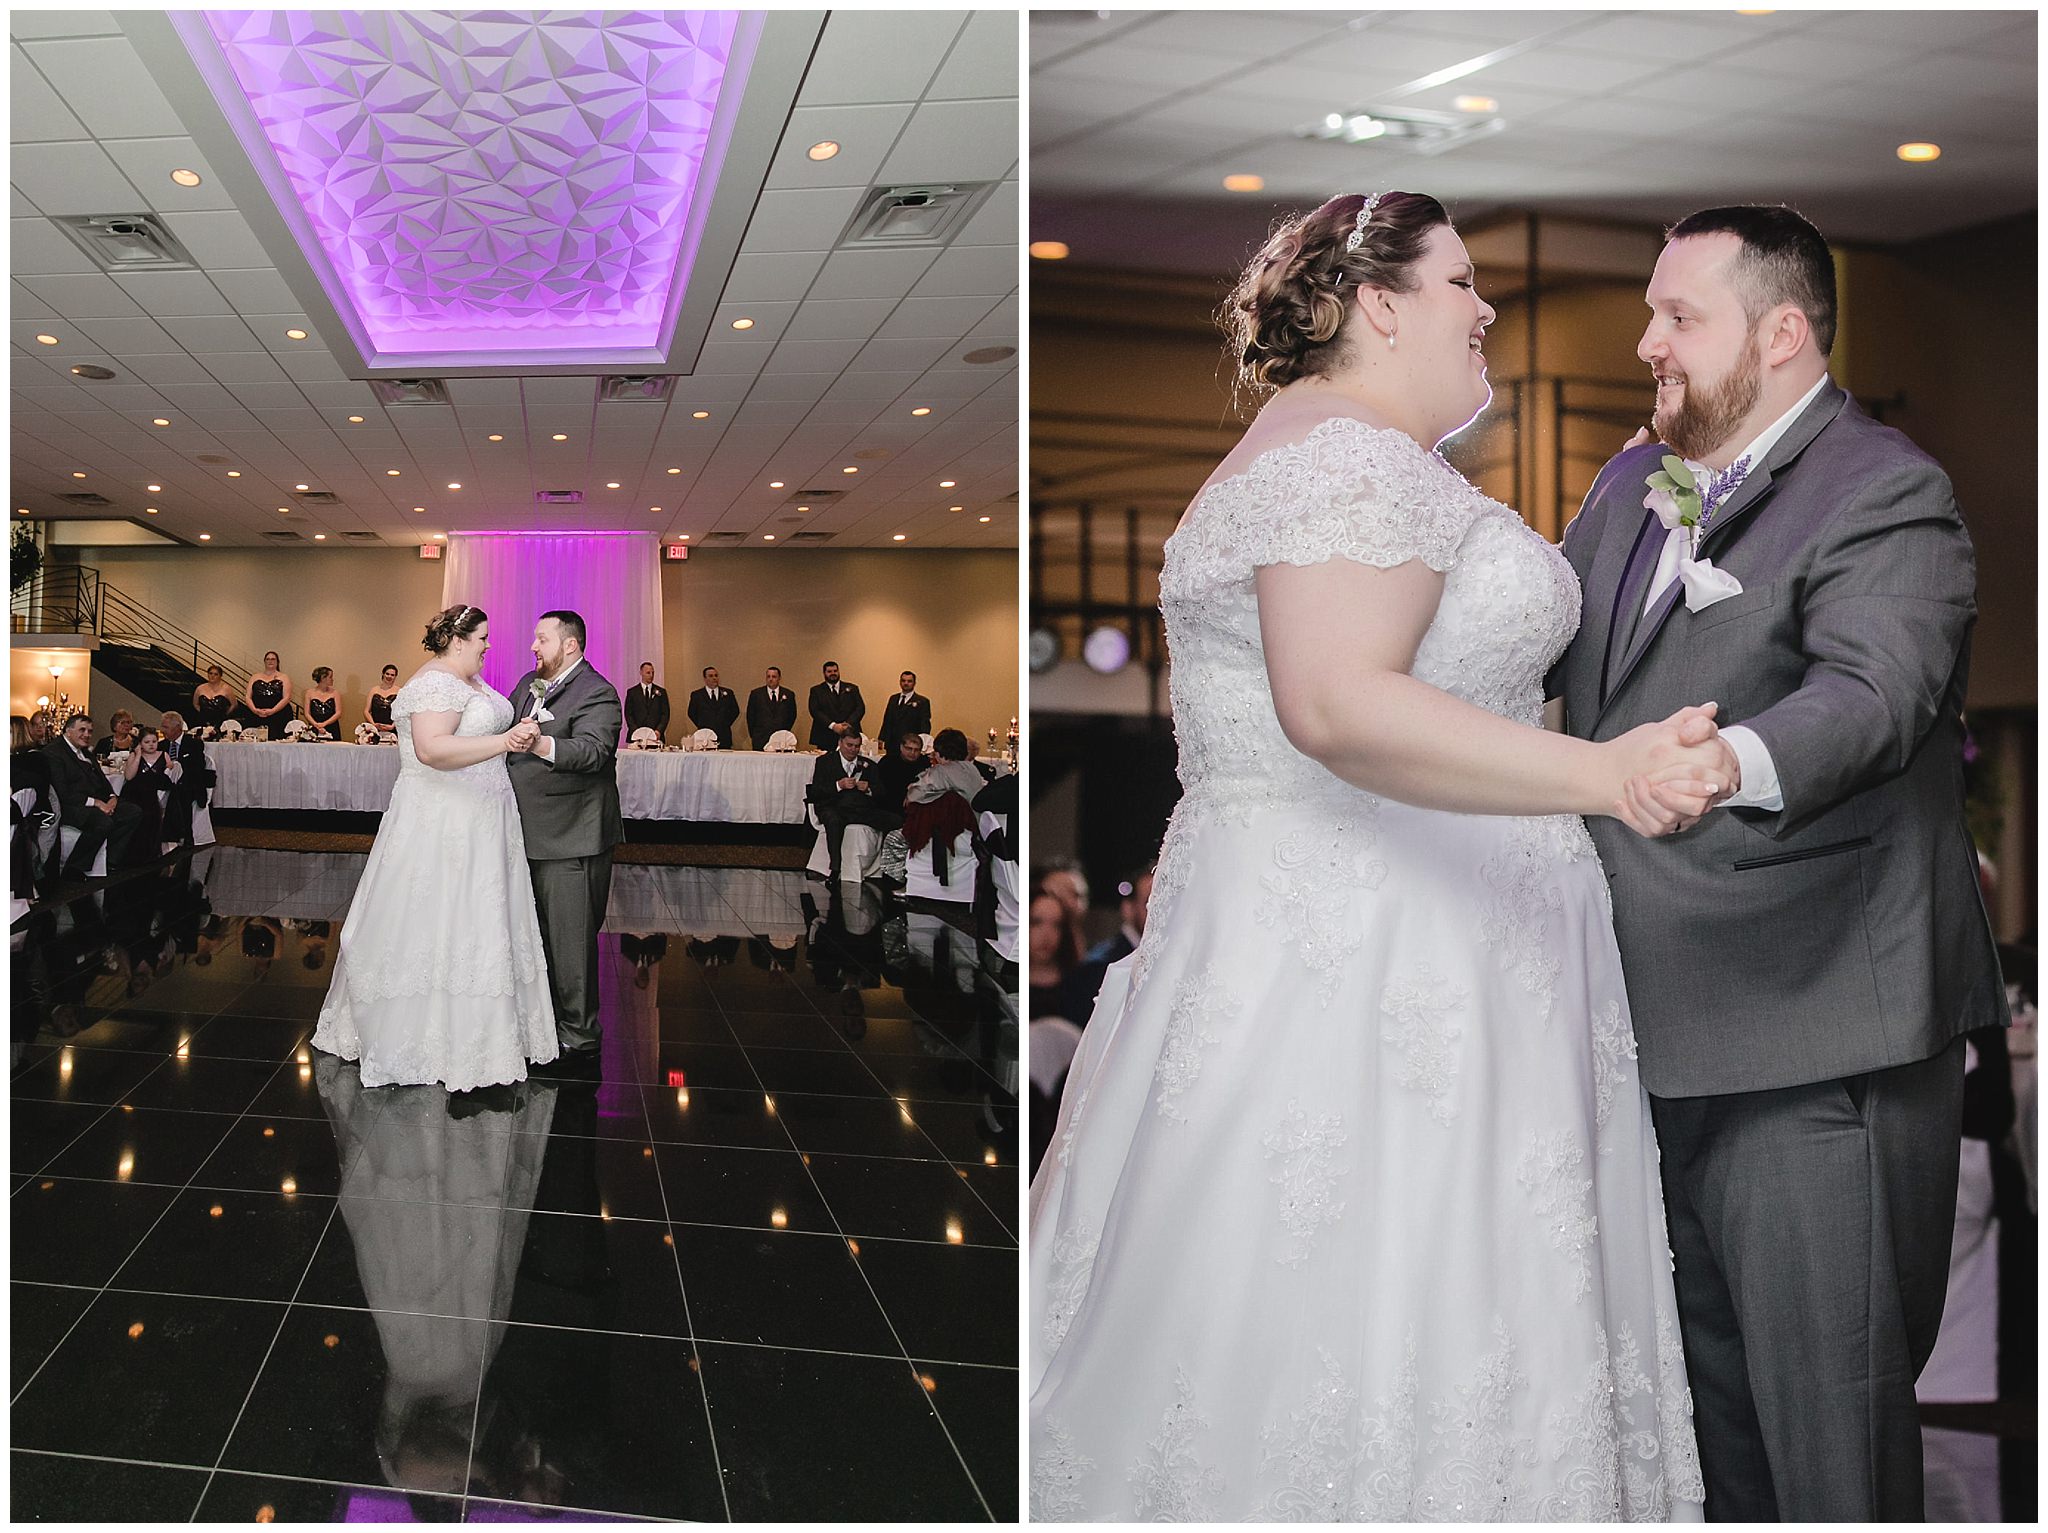 Newlyweds' first dance at their spring wedding at the Fez